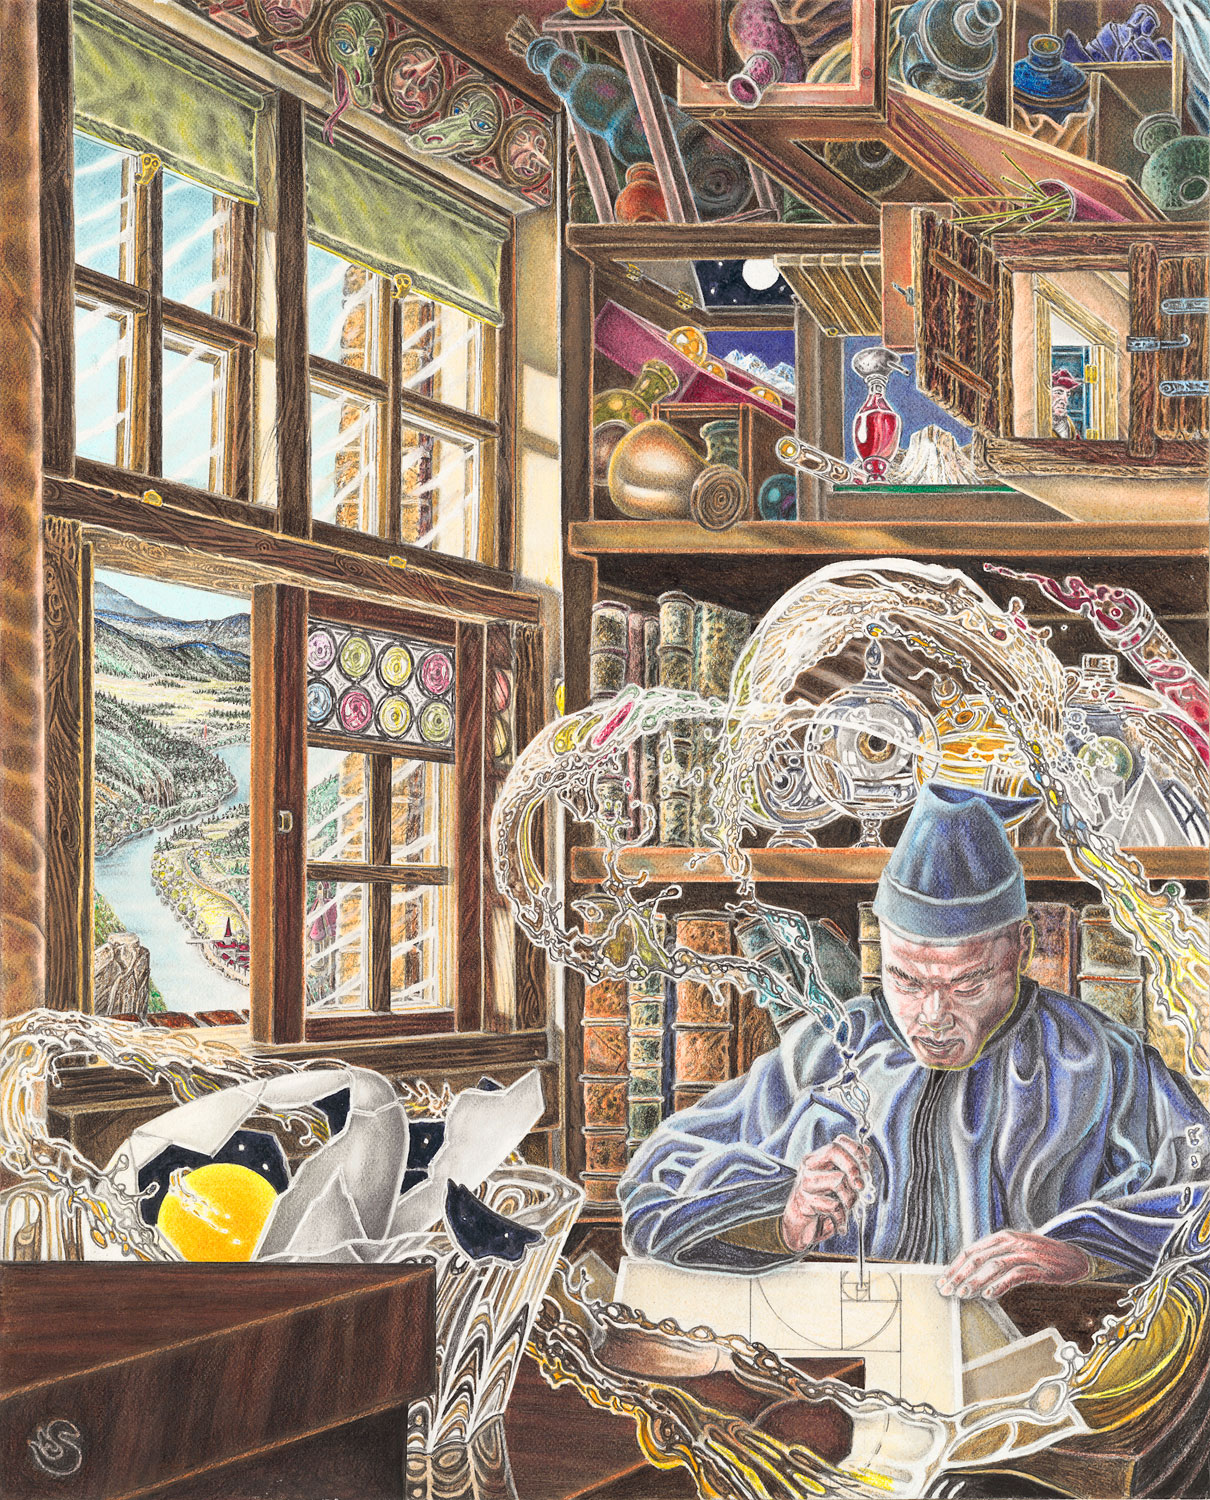 The Alchemist works in his study as his creations swirl up from the page